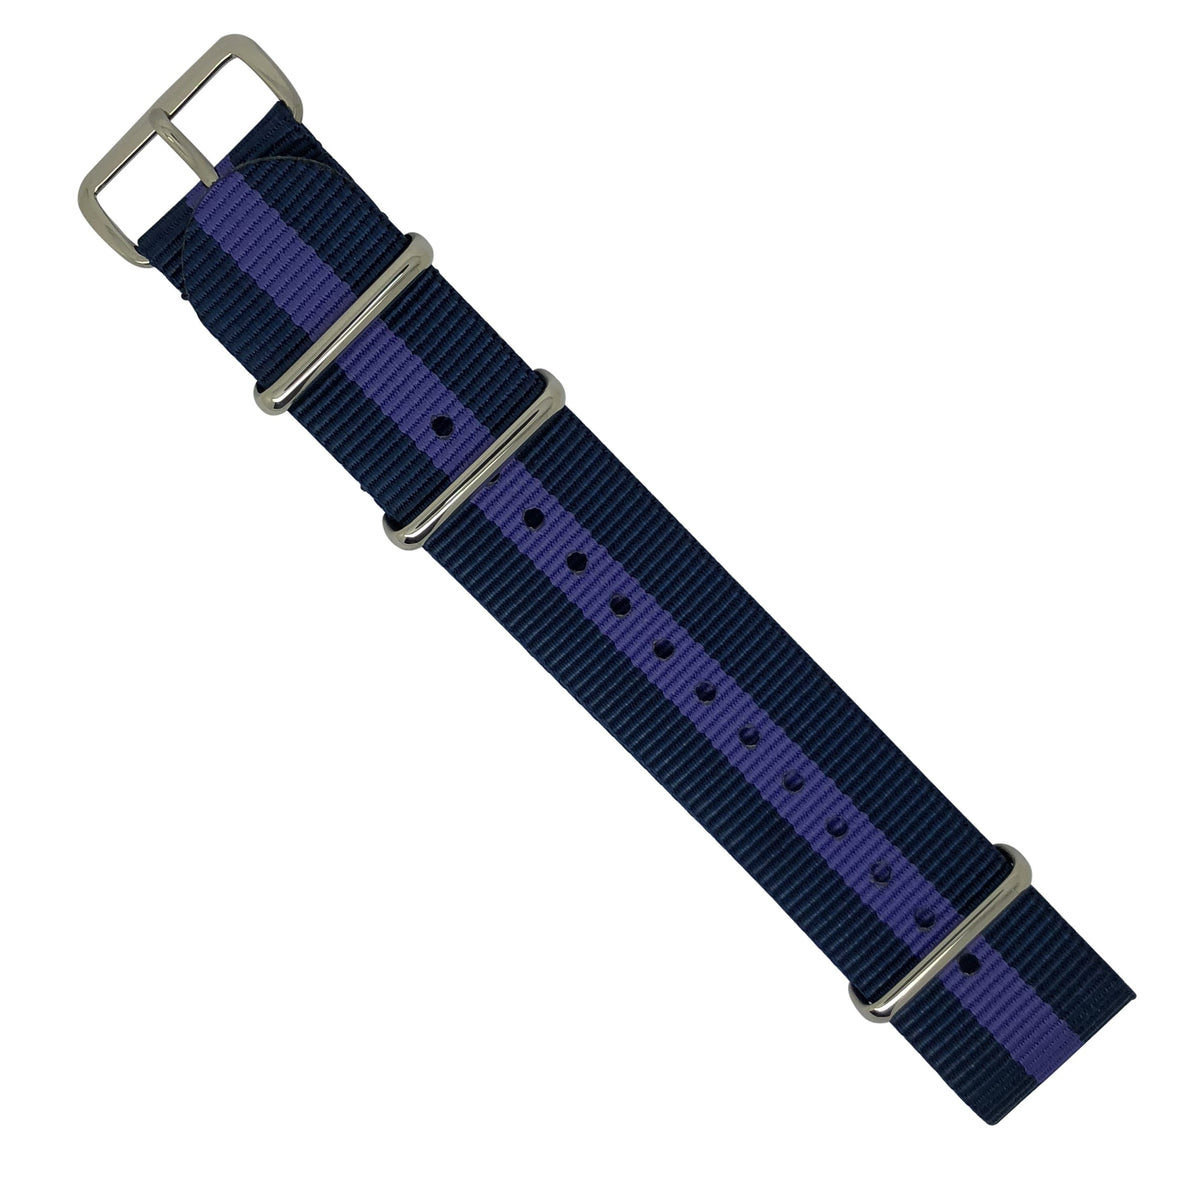 Premium Nato Strap in Navy Purple with Polished Silver Buckle (22mm) - Nomad watch Works